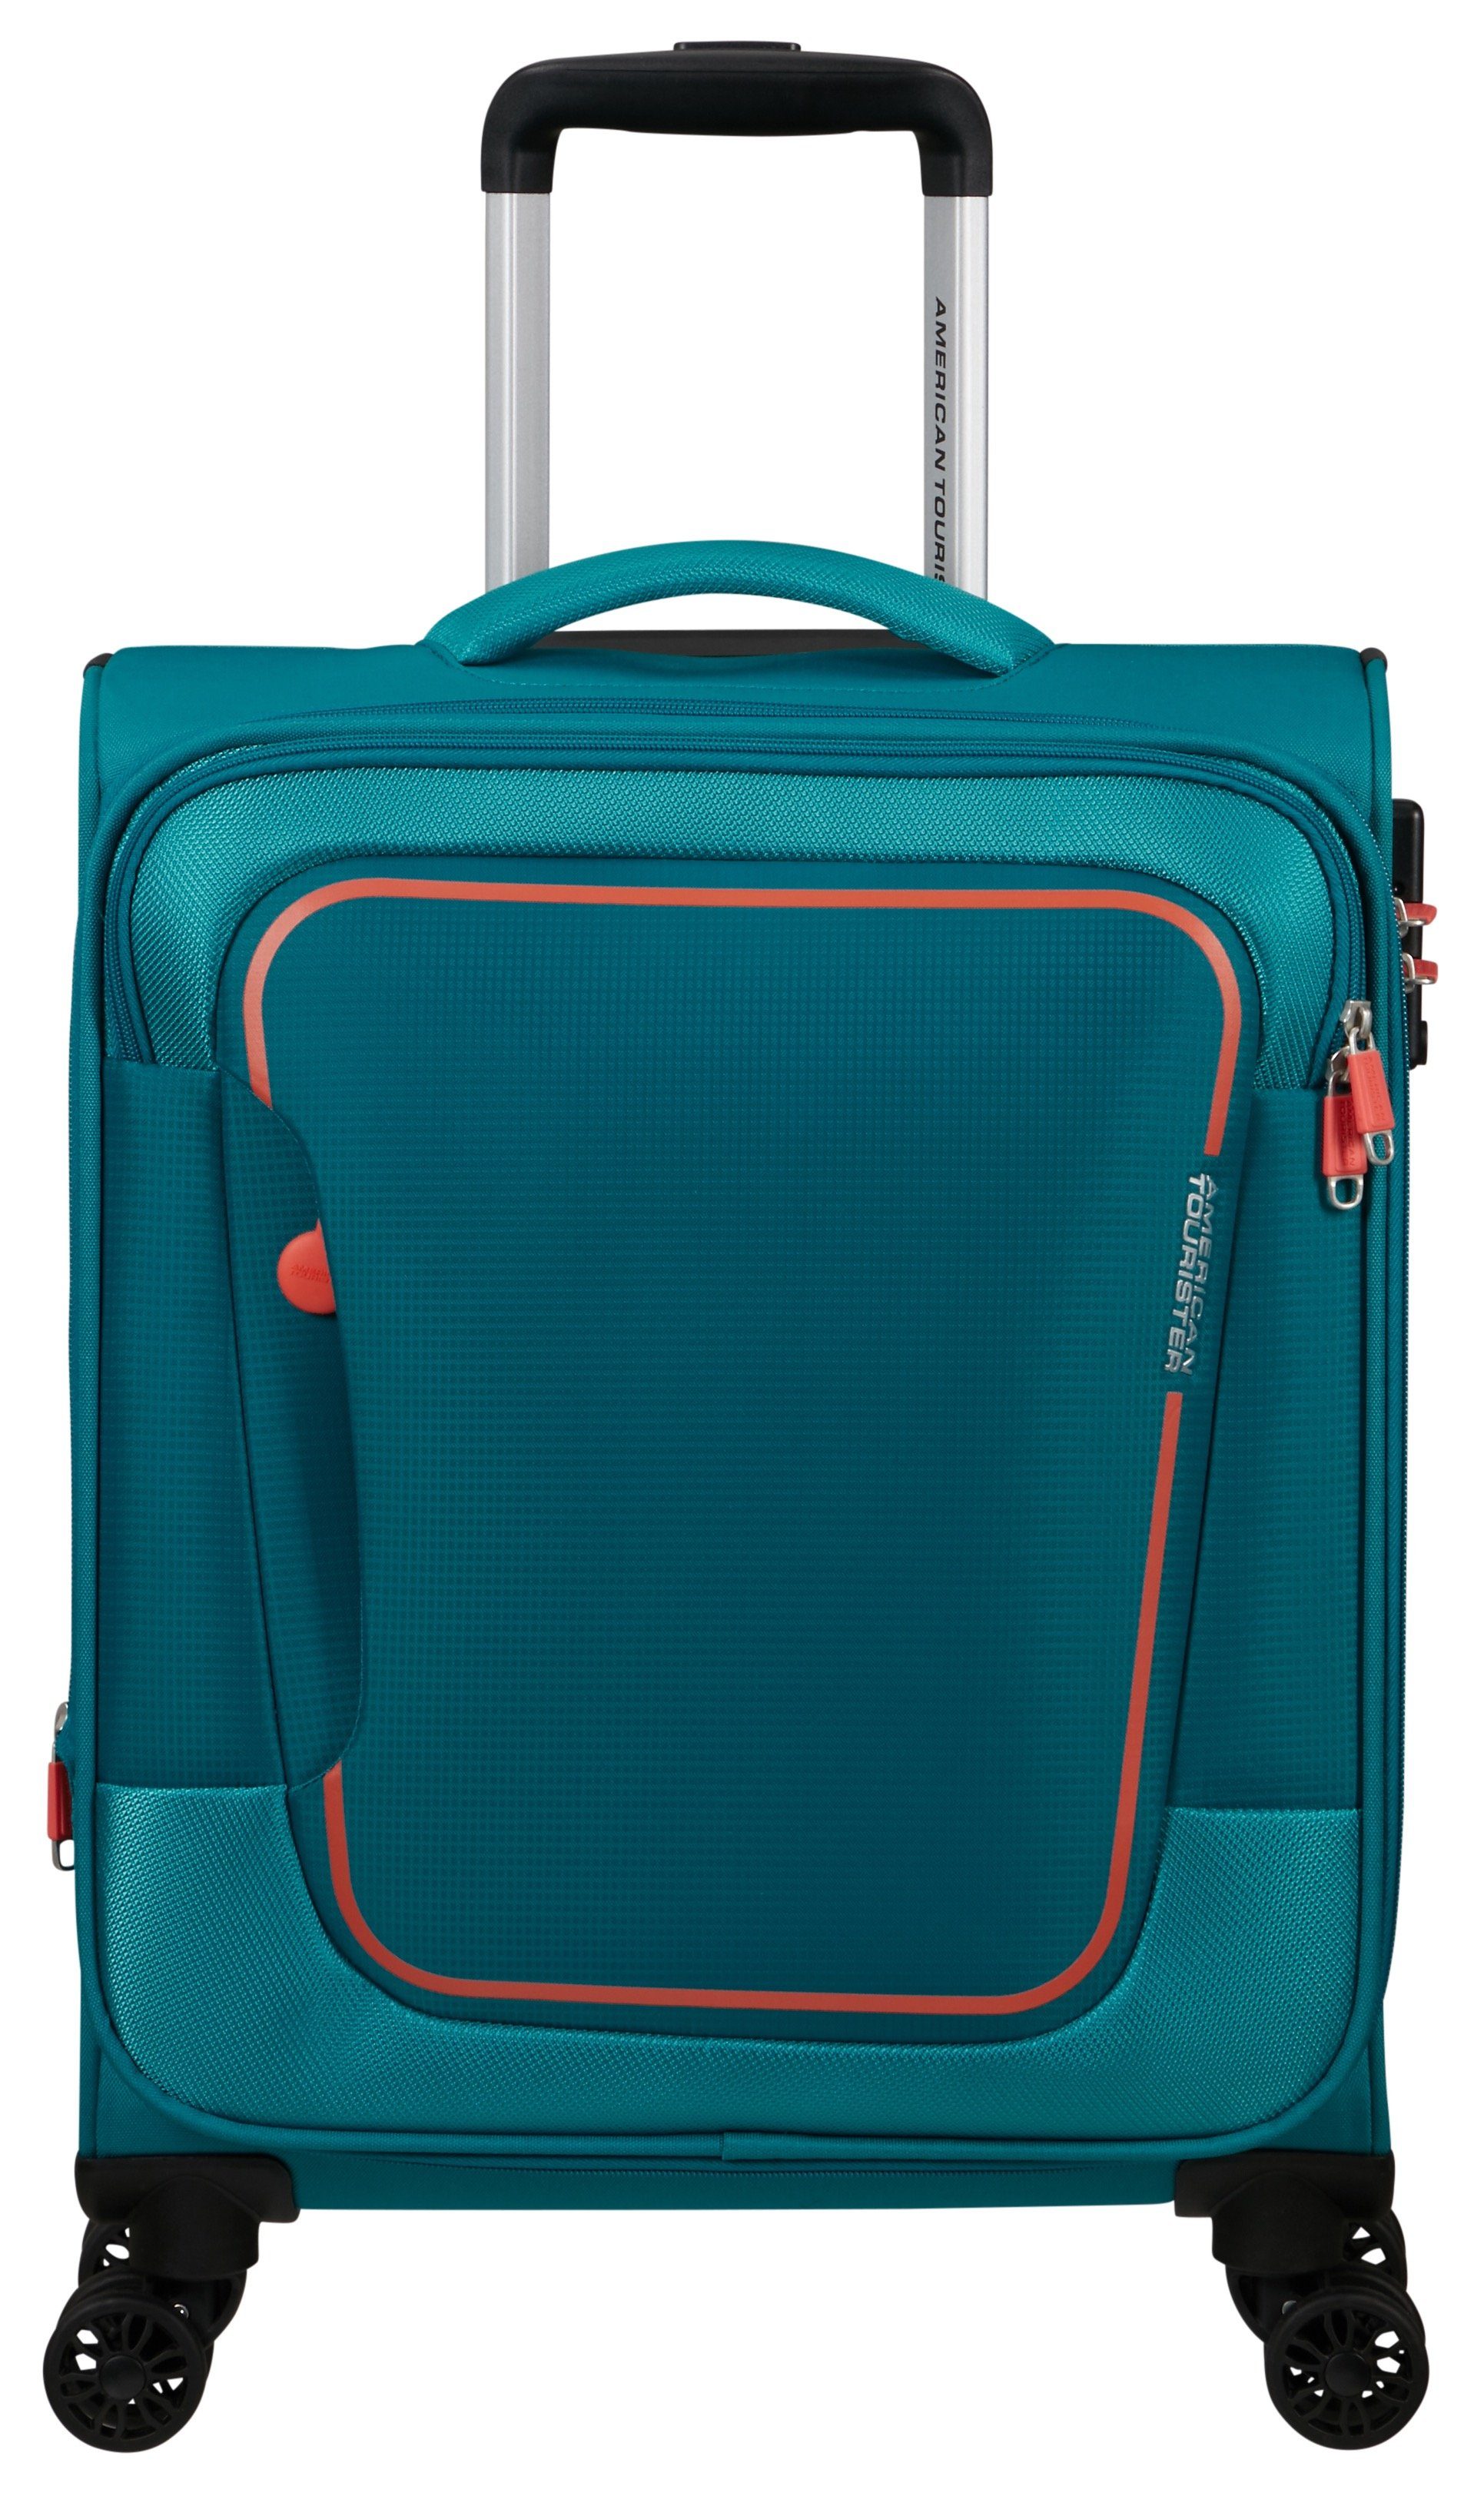 American Tourister® Koffer PULSONIC Spinner 55, 4 Rollen stone teal | Koffer